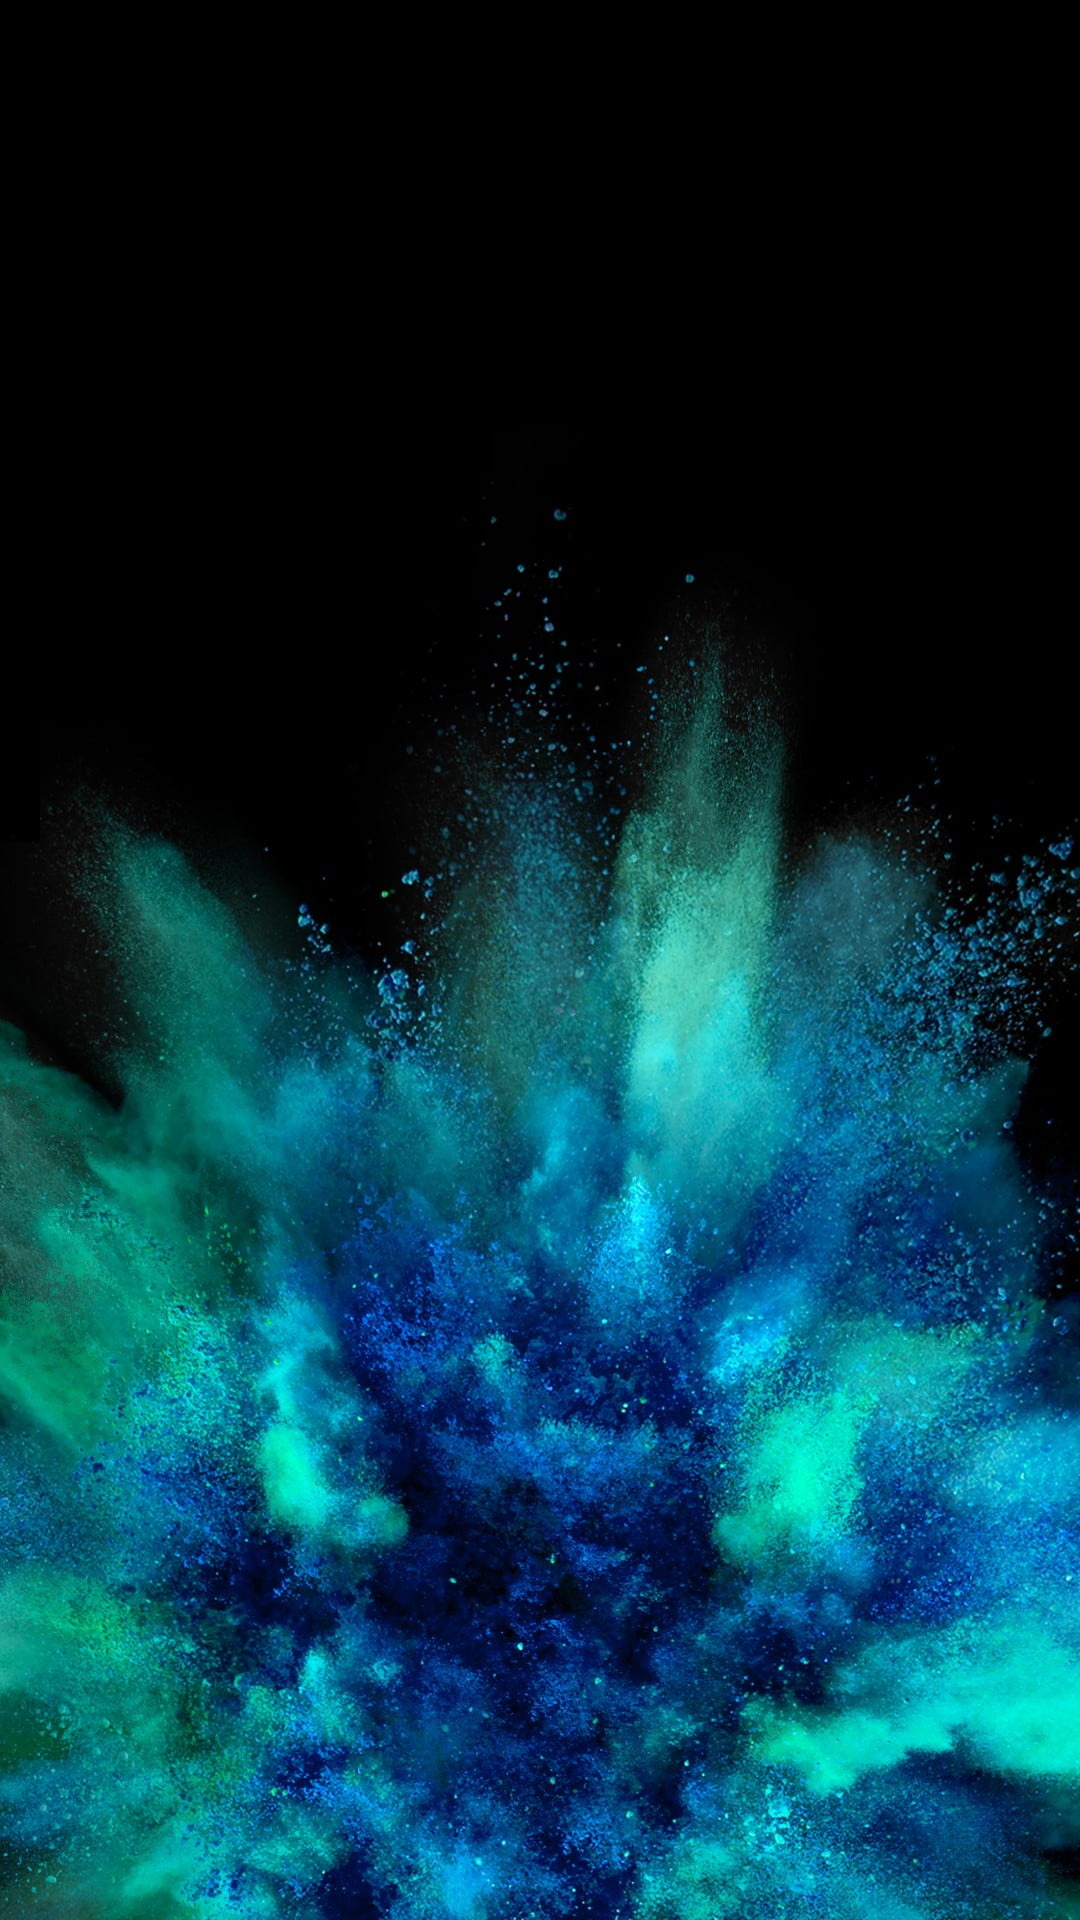 Teal and blue powders, Vibrant colors, Artistic display, Abstract wallpaper, 1080x1920 Full HD Handy